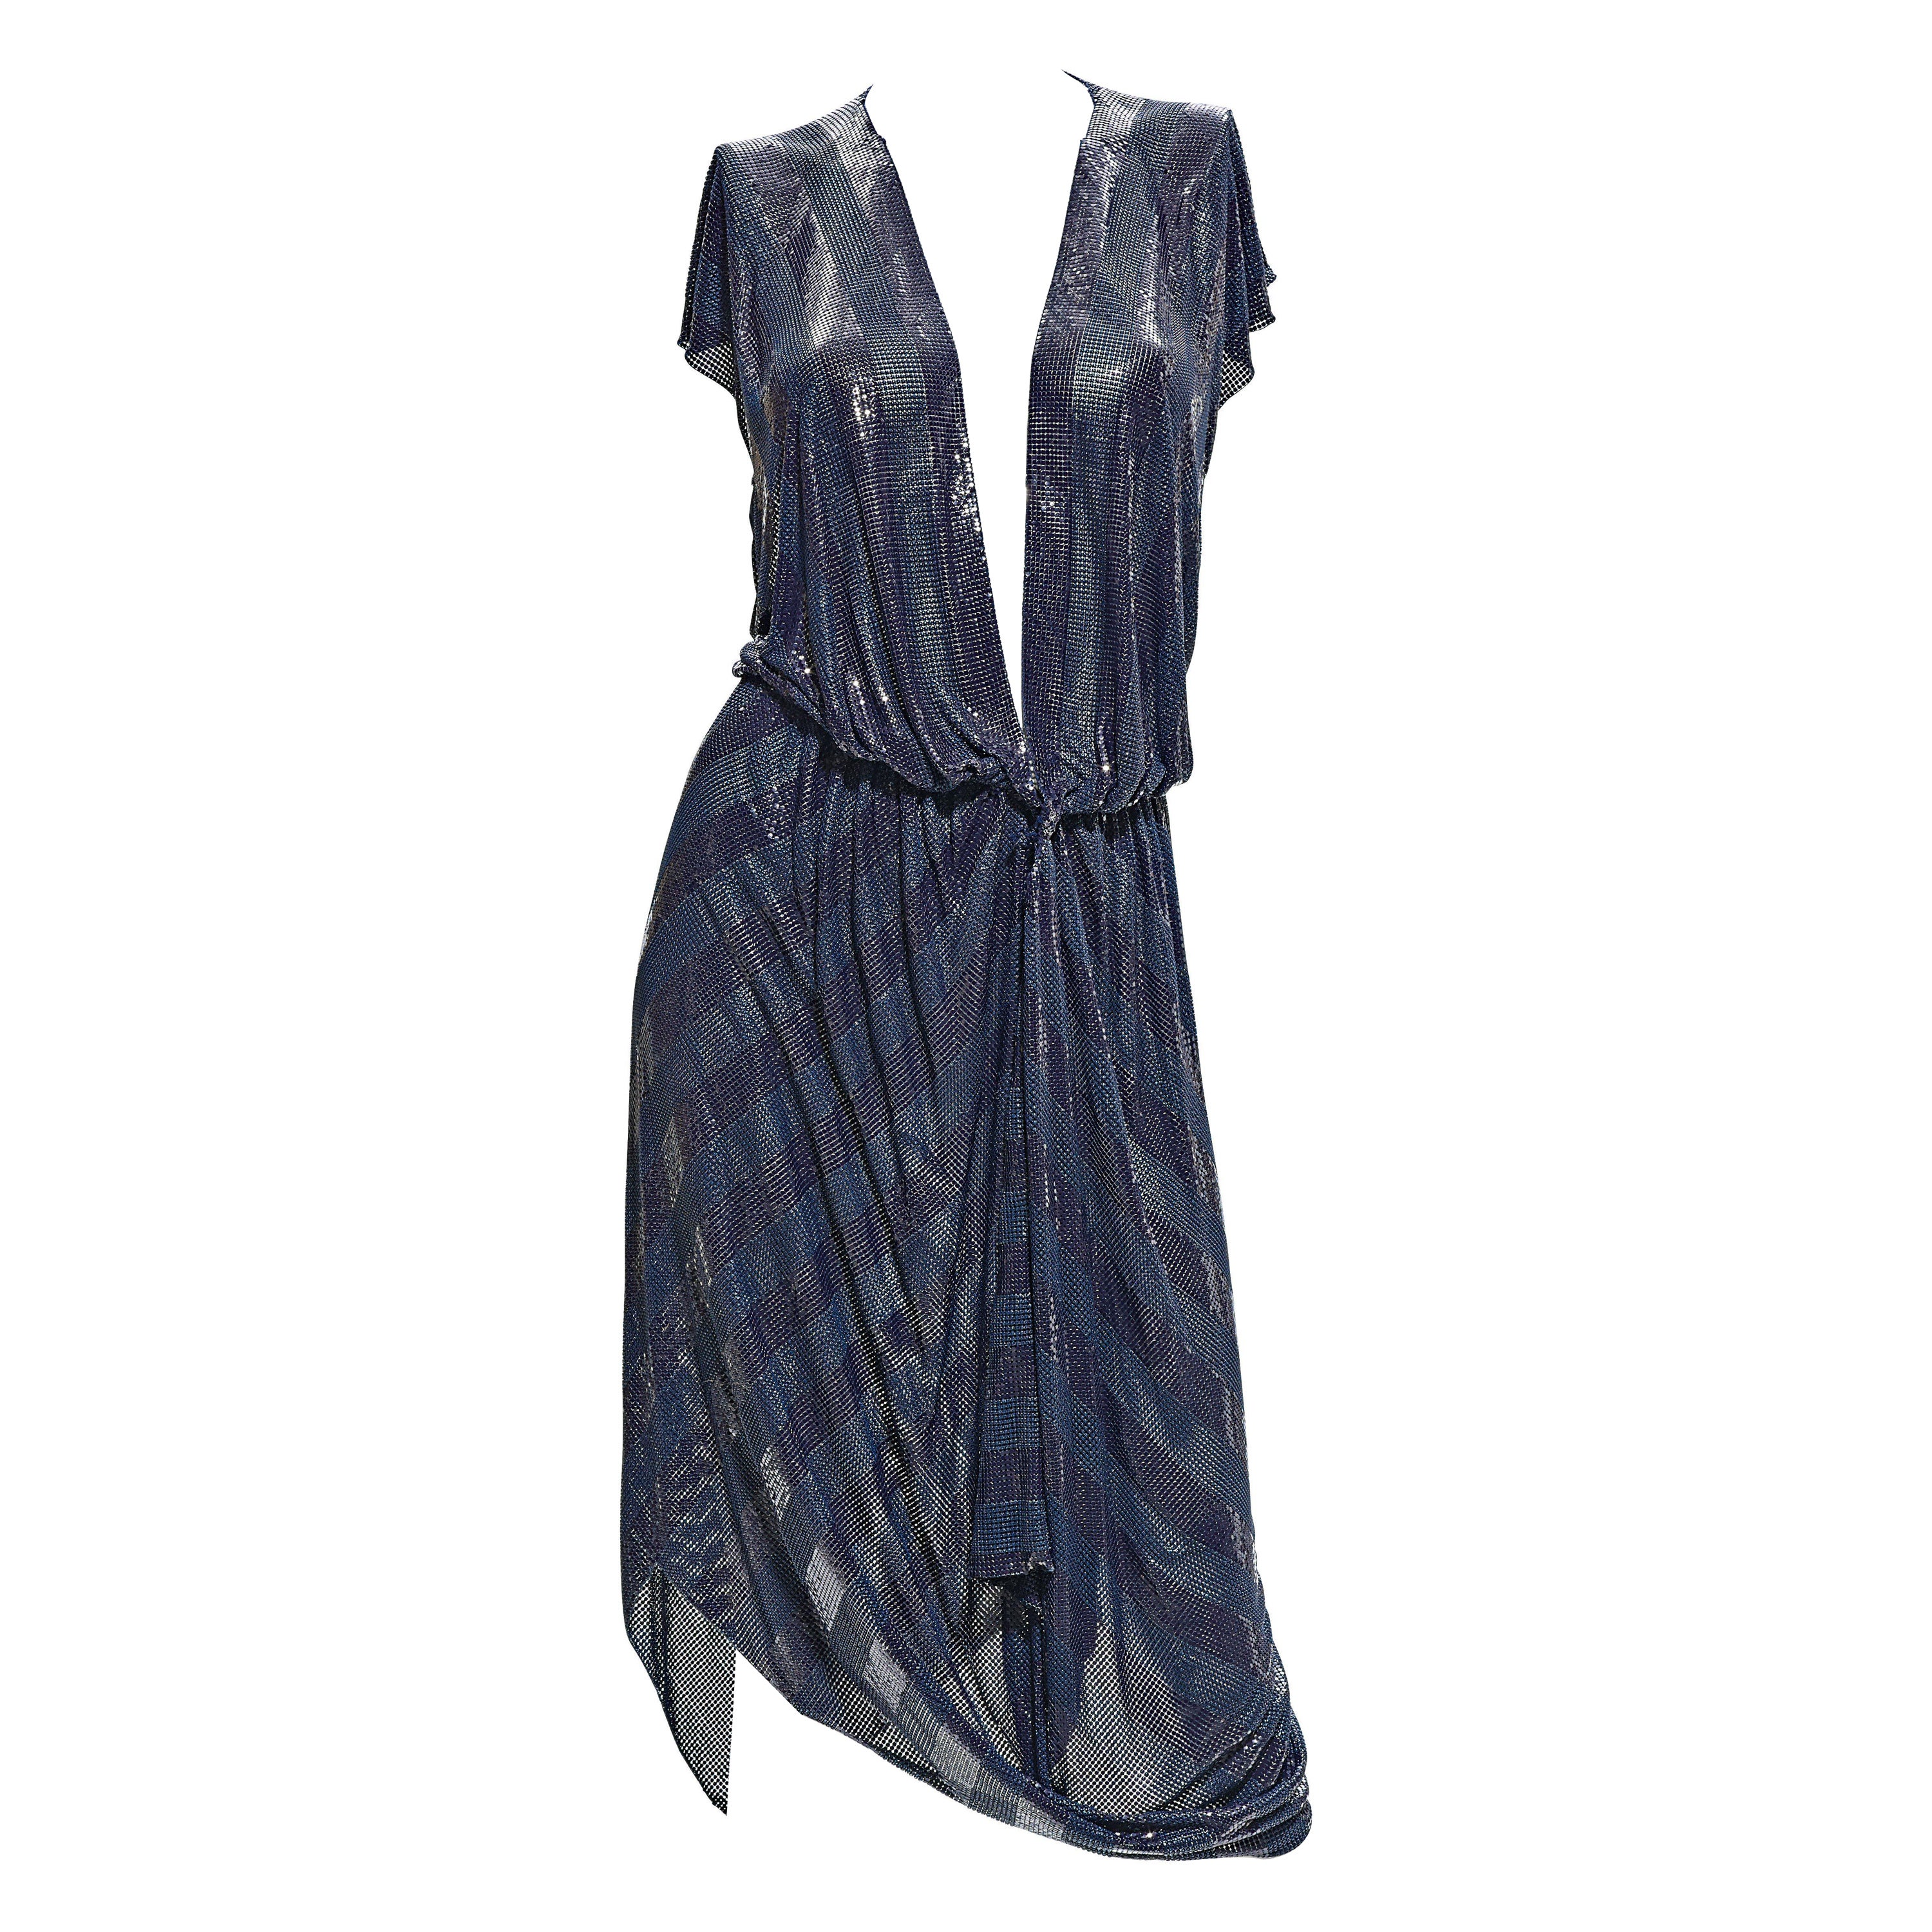 Vintage Gianni Versace Navy Striped Oroton Metal Mesh Chainmail Dress Ca. 1983 For Sale